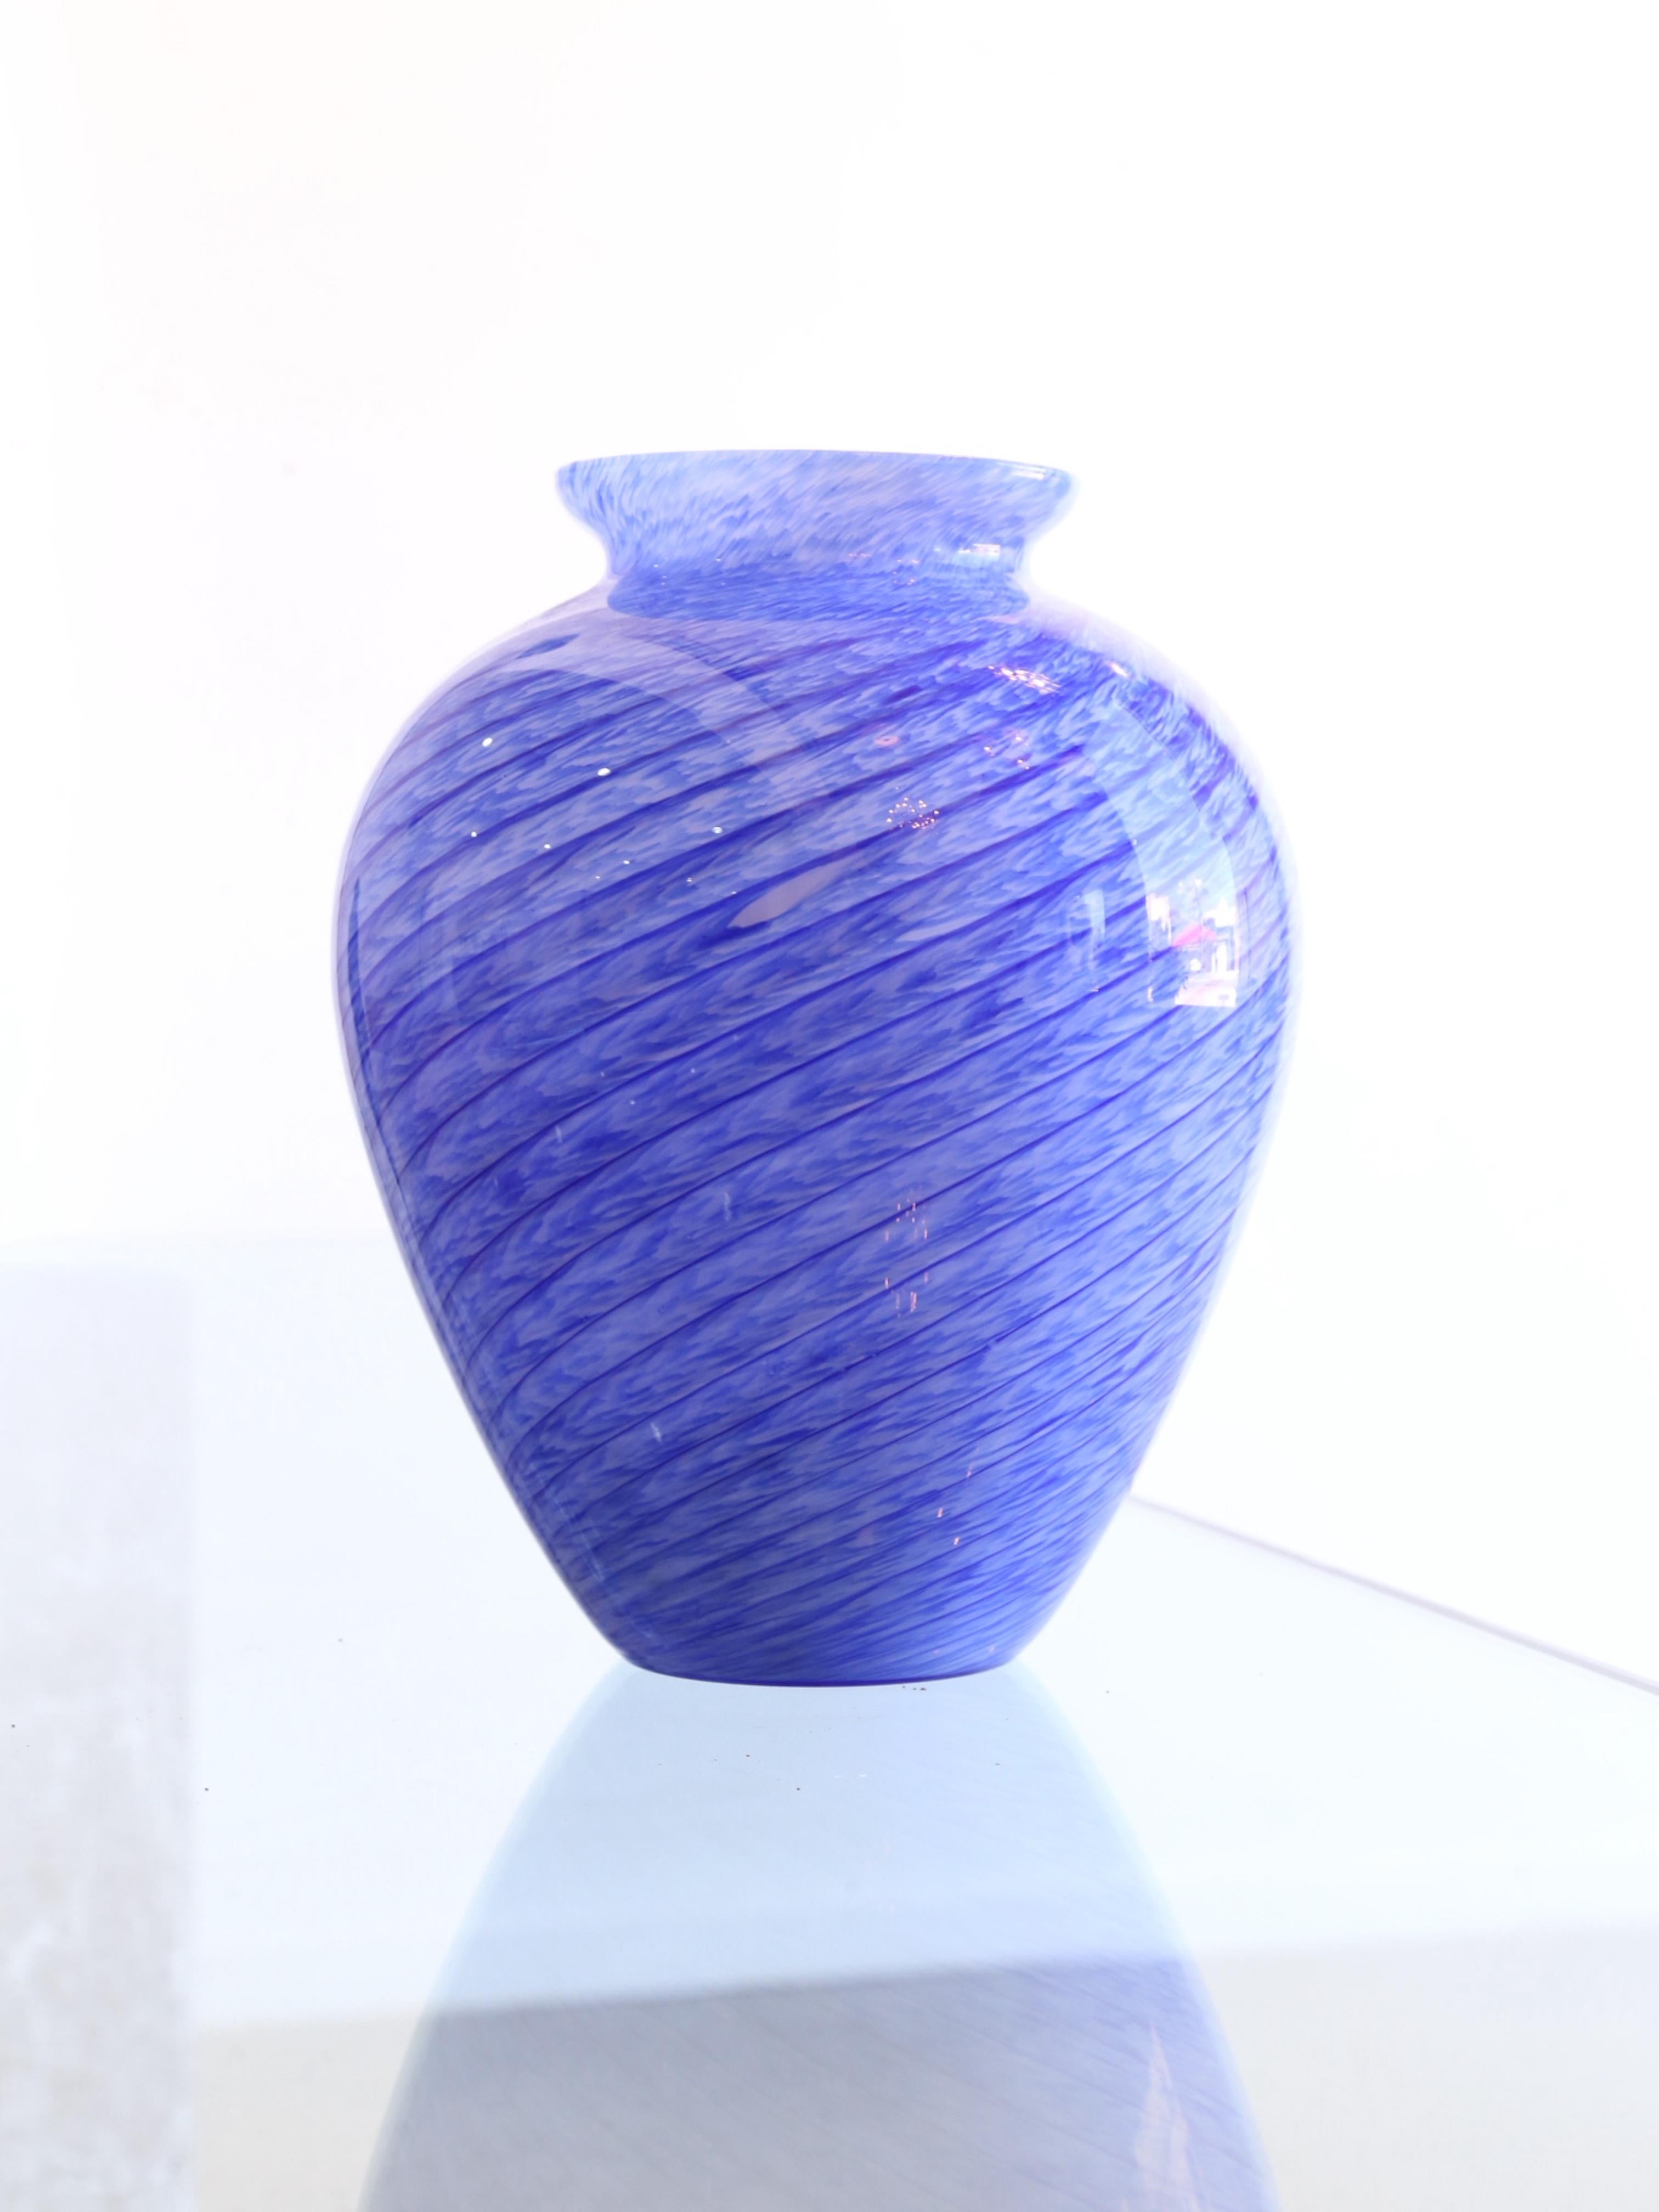 Unique blue and white stripes Murano vase or centrepiece. 
During this period, Italian glassmakers were at the forefront of the modernist movement in glass design, creating pieces that were both functional and aesthetically stunning.

Some of the